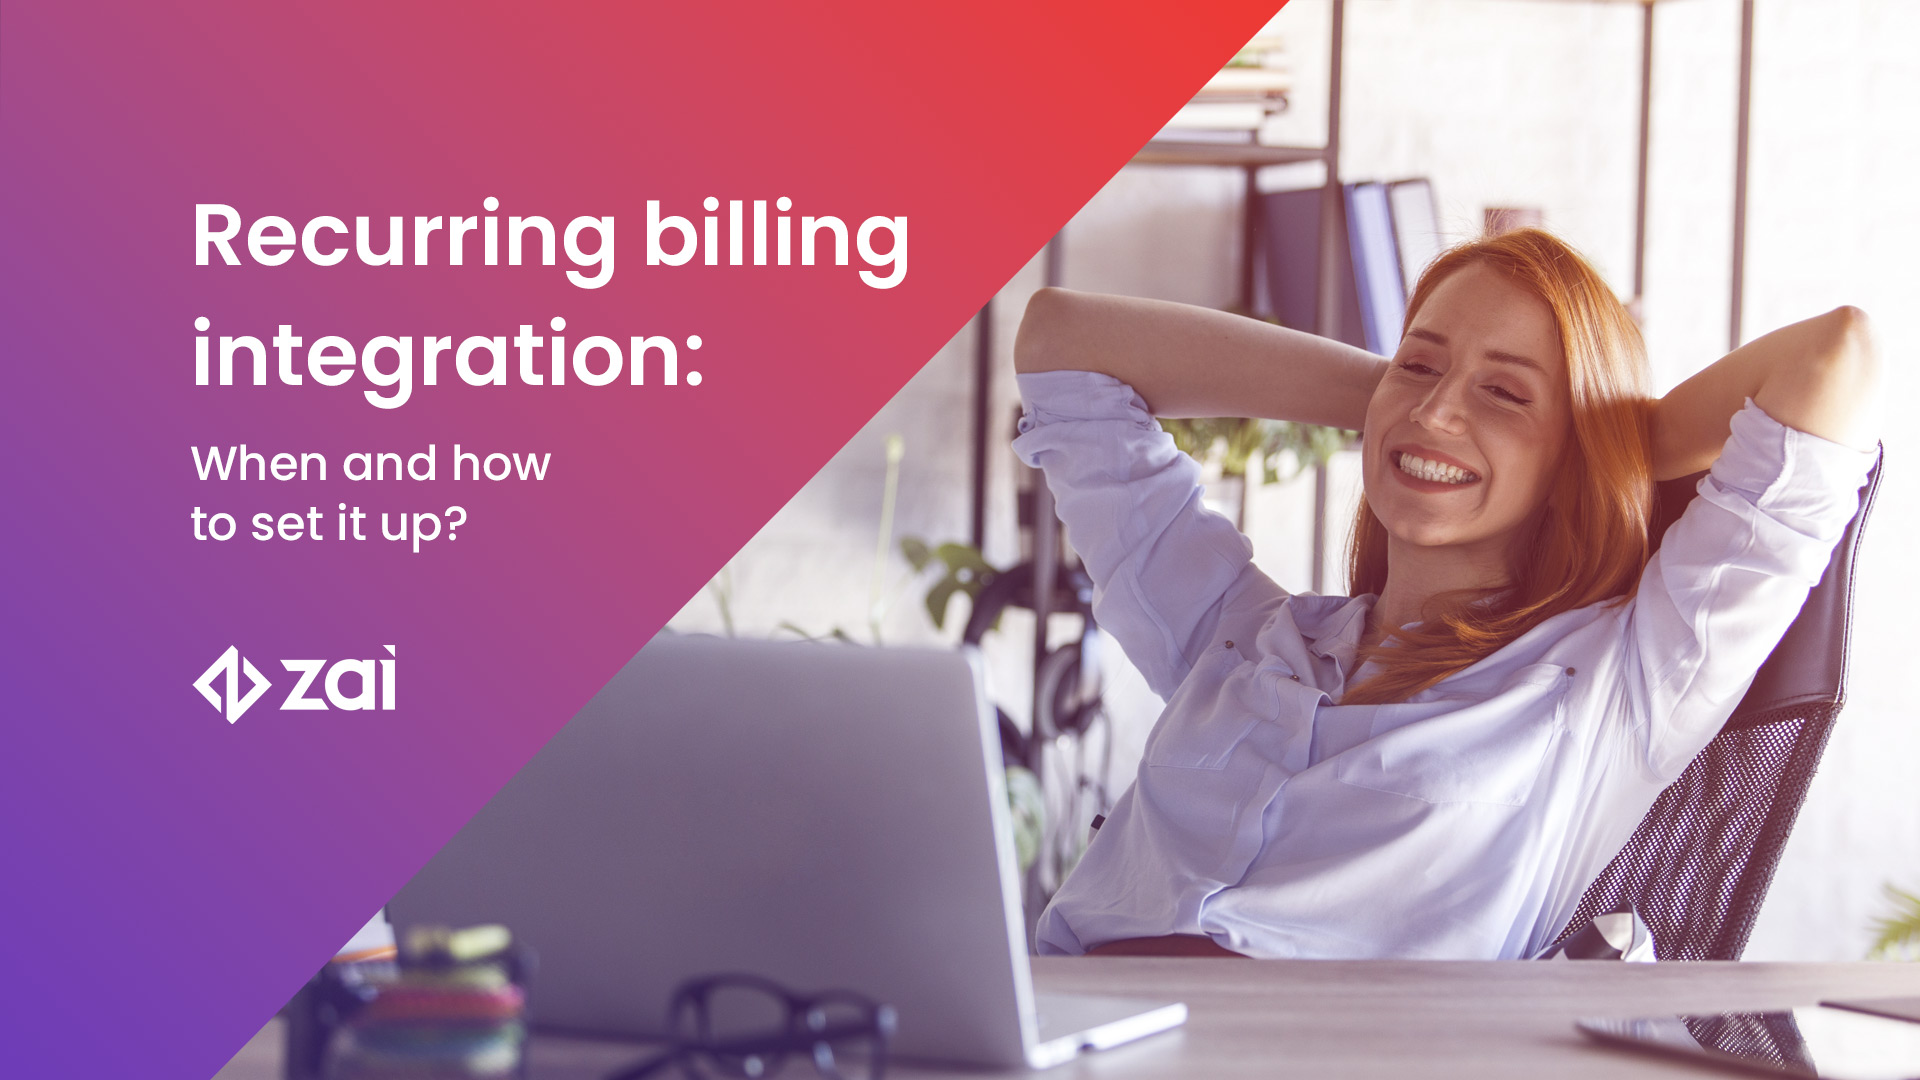 Recurring billing integration: When and how to set it up?